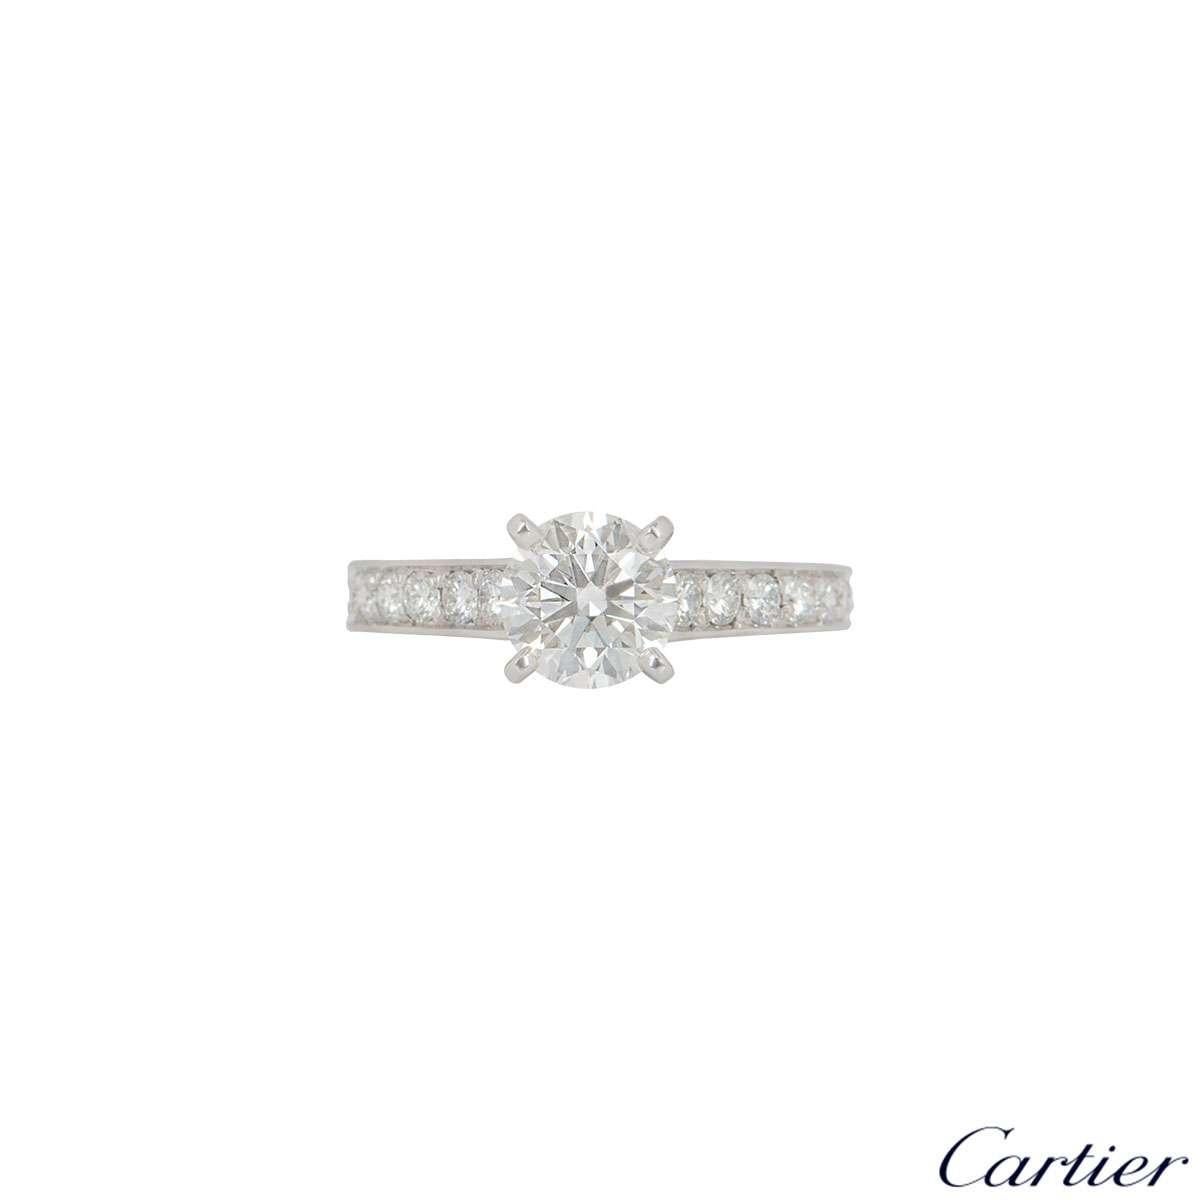 A stunning platinum Cartier diamond engagement ring from the 1895 solitaire collection. The ring comprises of a round brilliant cut diamond in a four claw setting with a weight of 1.22ct, G colour and VVS1 clarity with 9 round brilliant cut diamonds